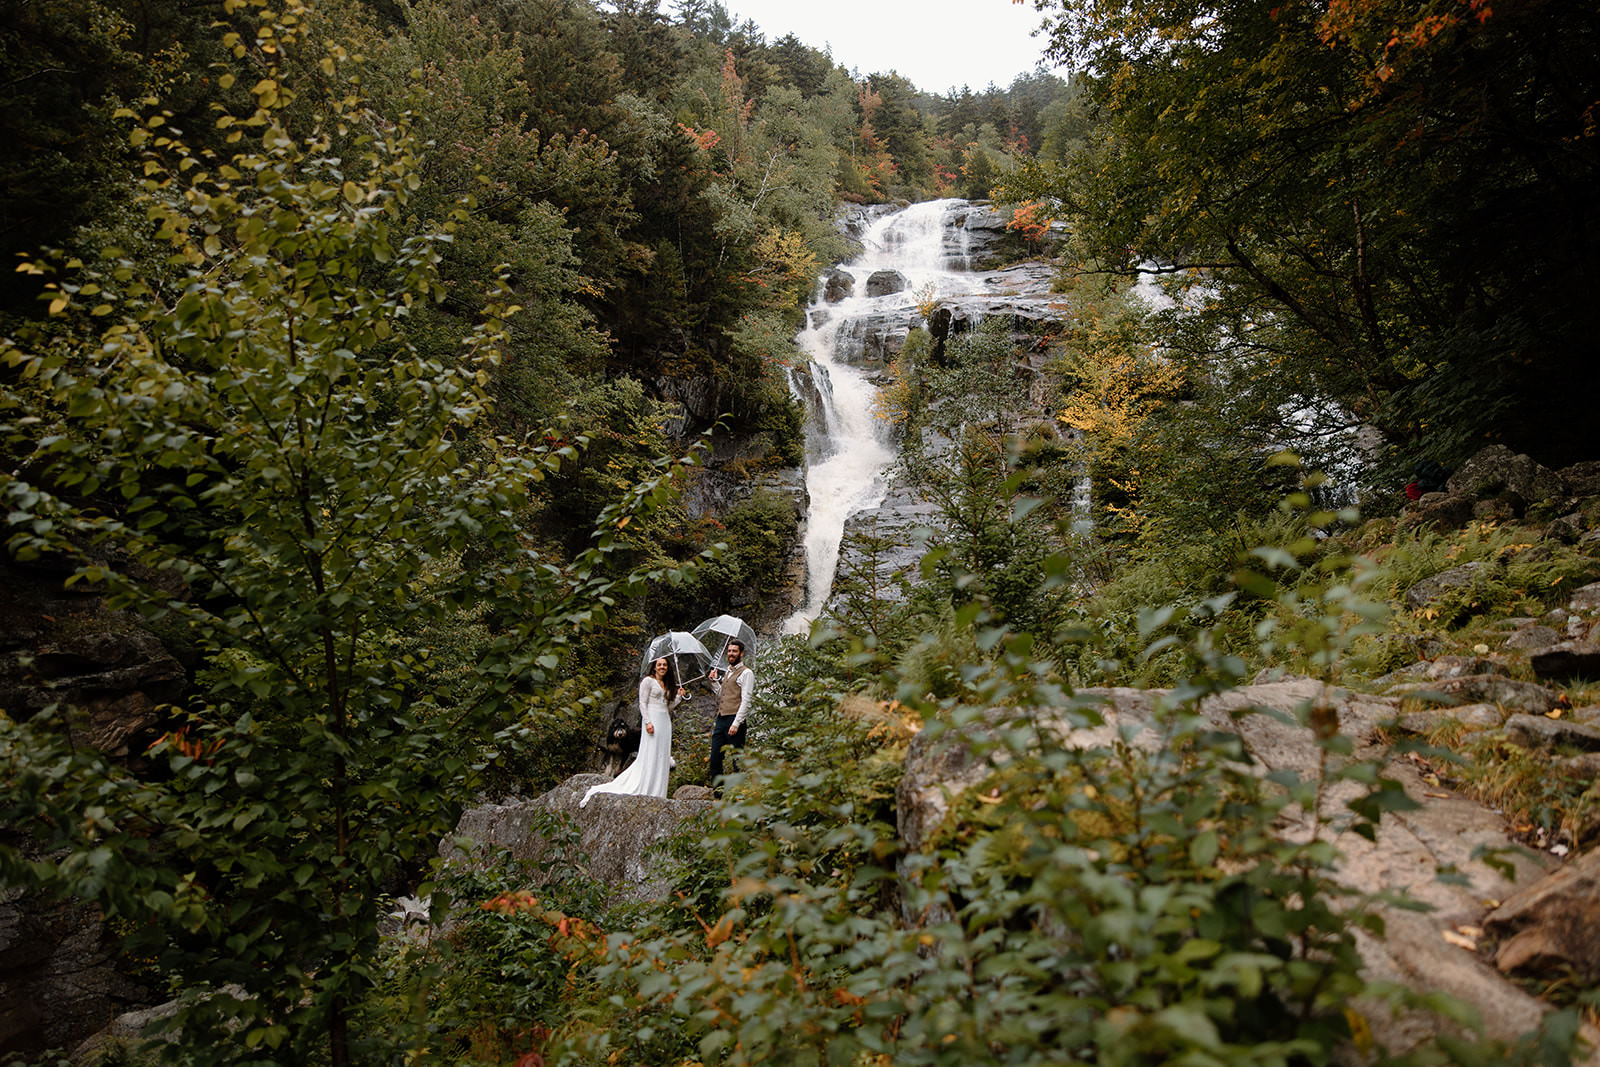 Waterfall exploring is a great elopement idea for your adventure elopement in the outdoors.